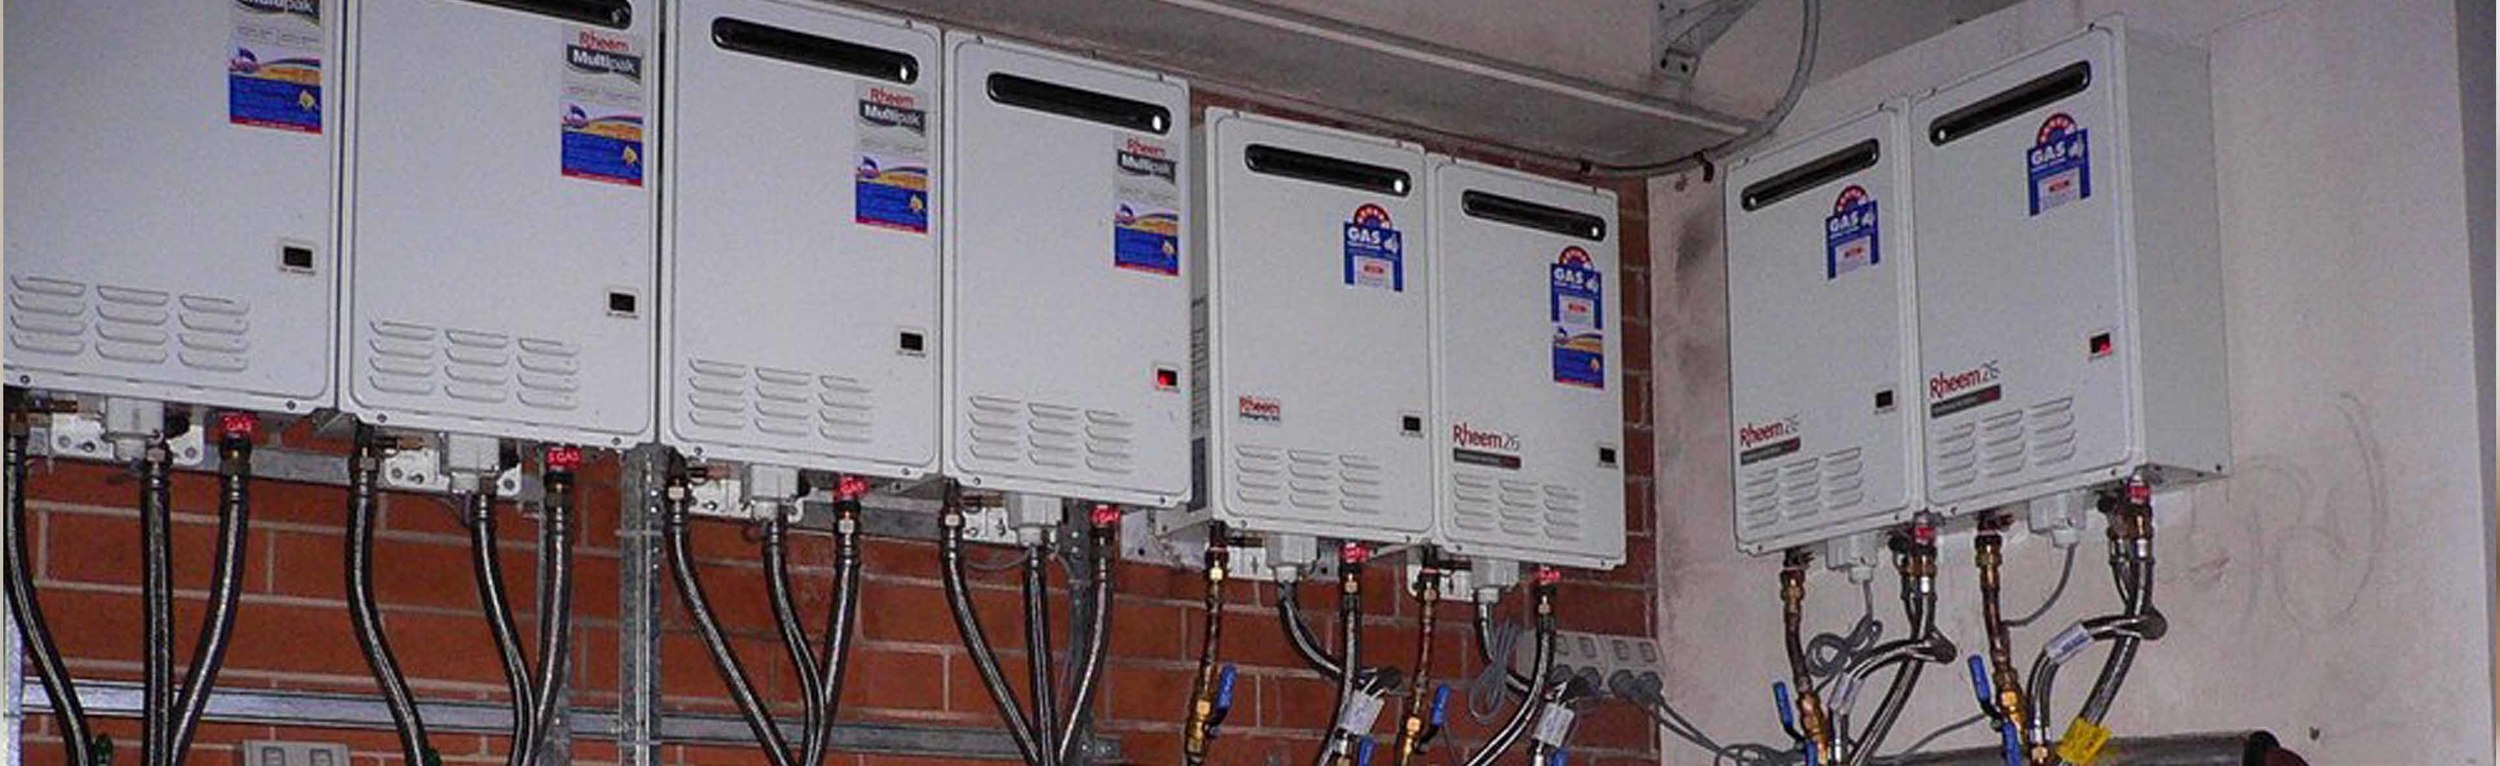 gas hot water system installation repair queensland provincial gas and plumbing.jpg